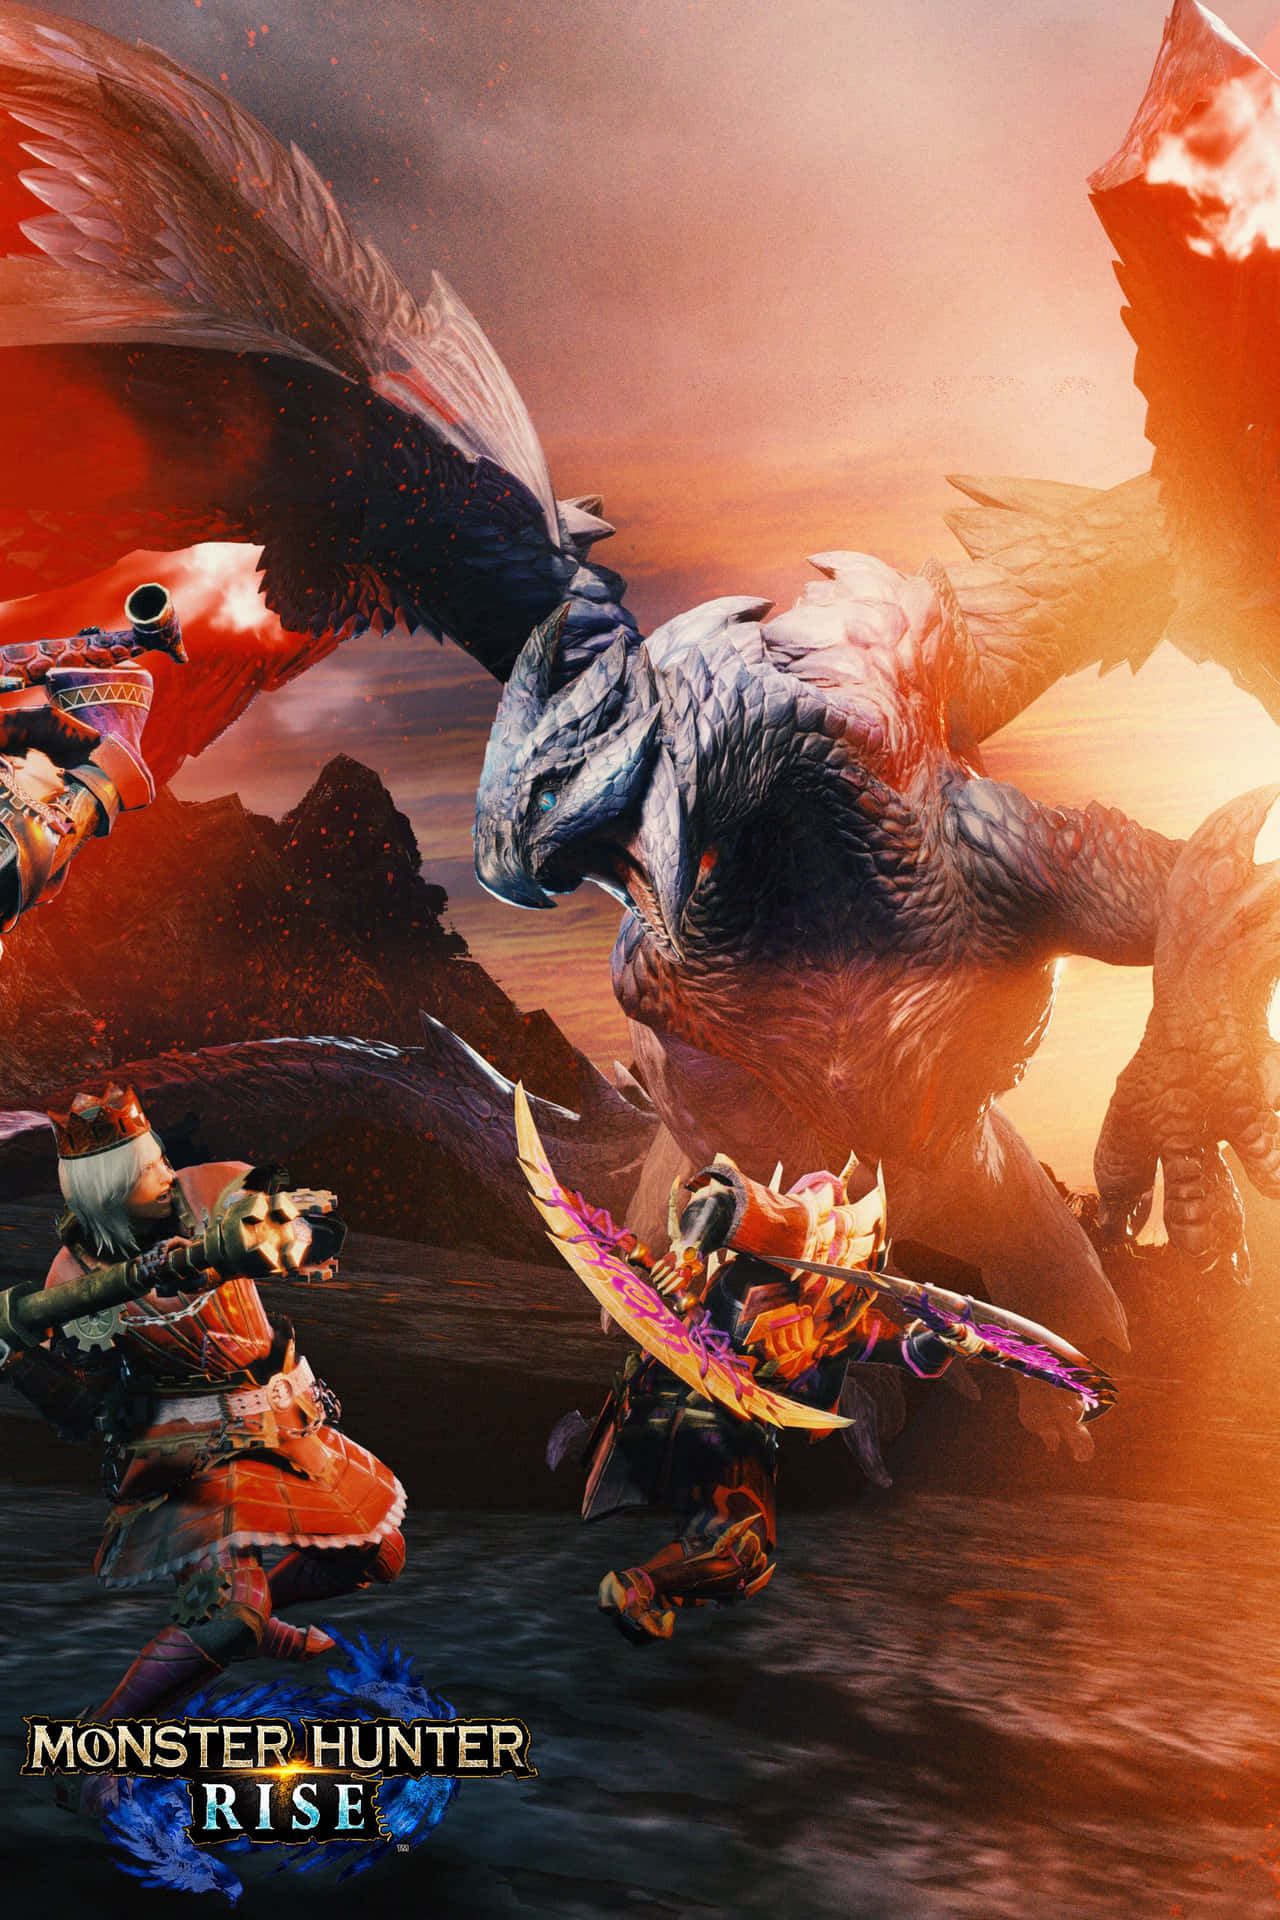 Hunt down a variety of powerful monsters in Monster Hunter 3 Wallpaper